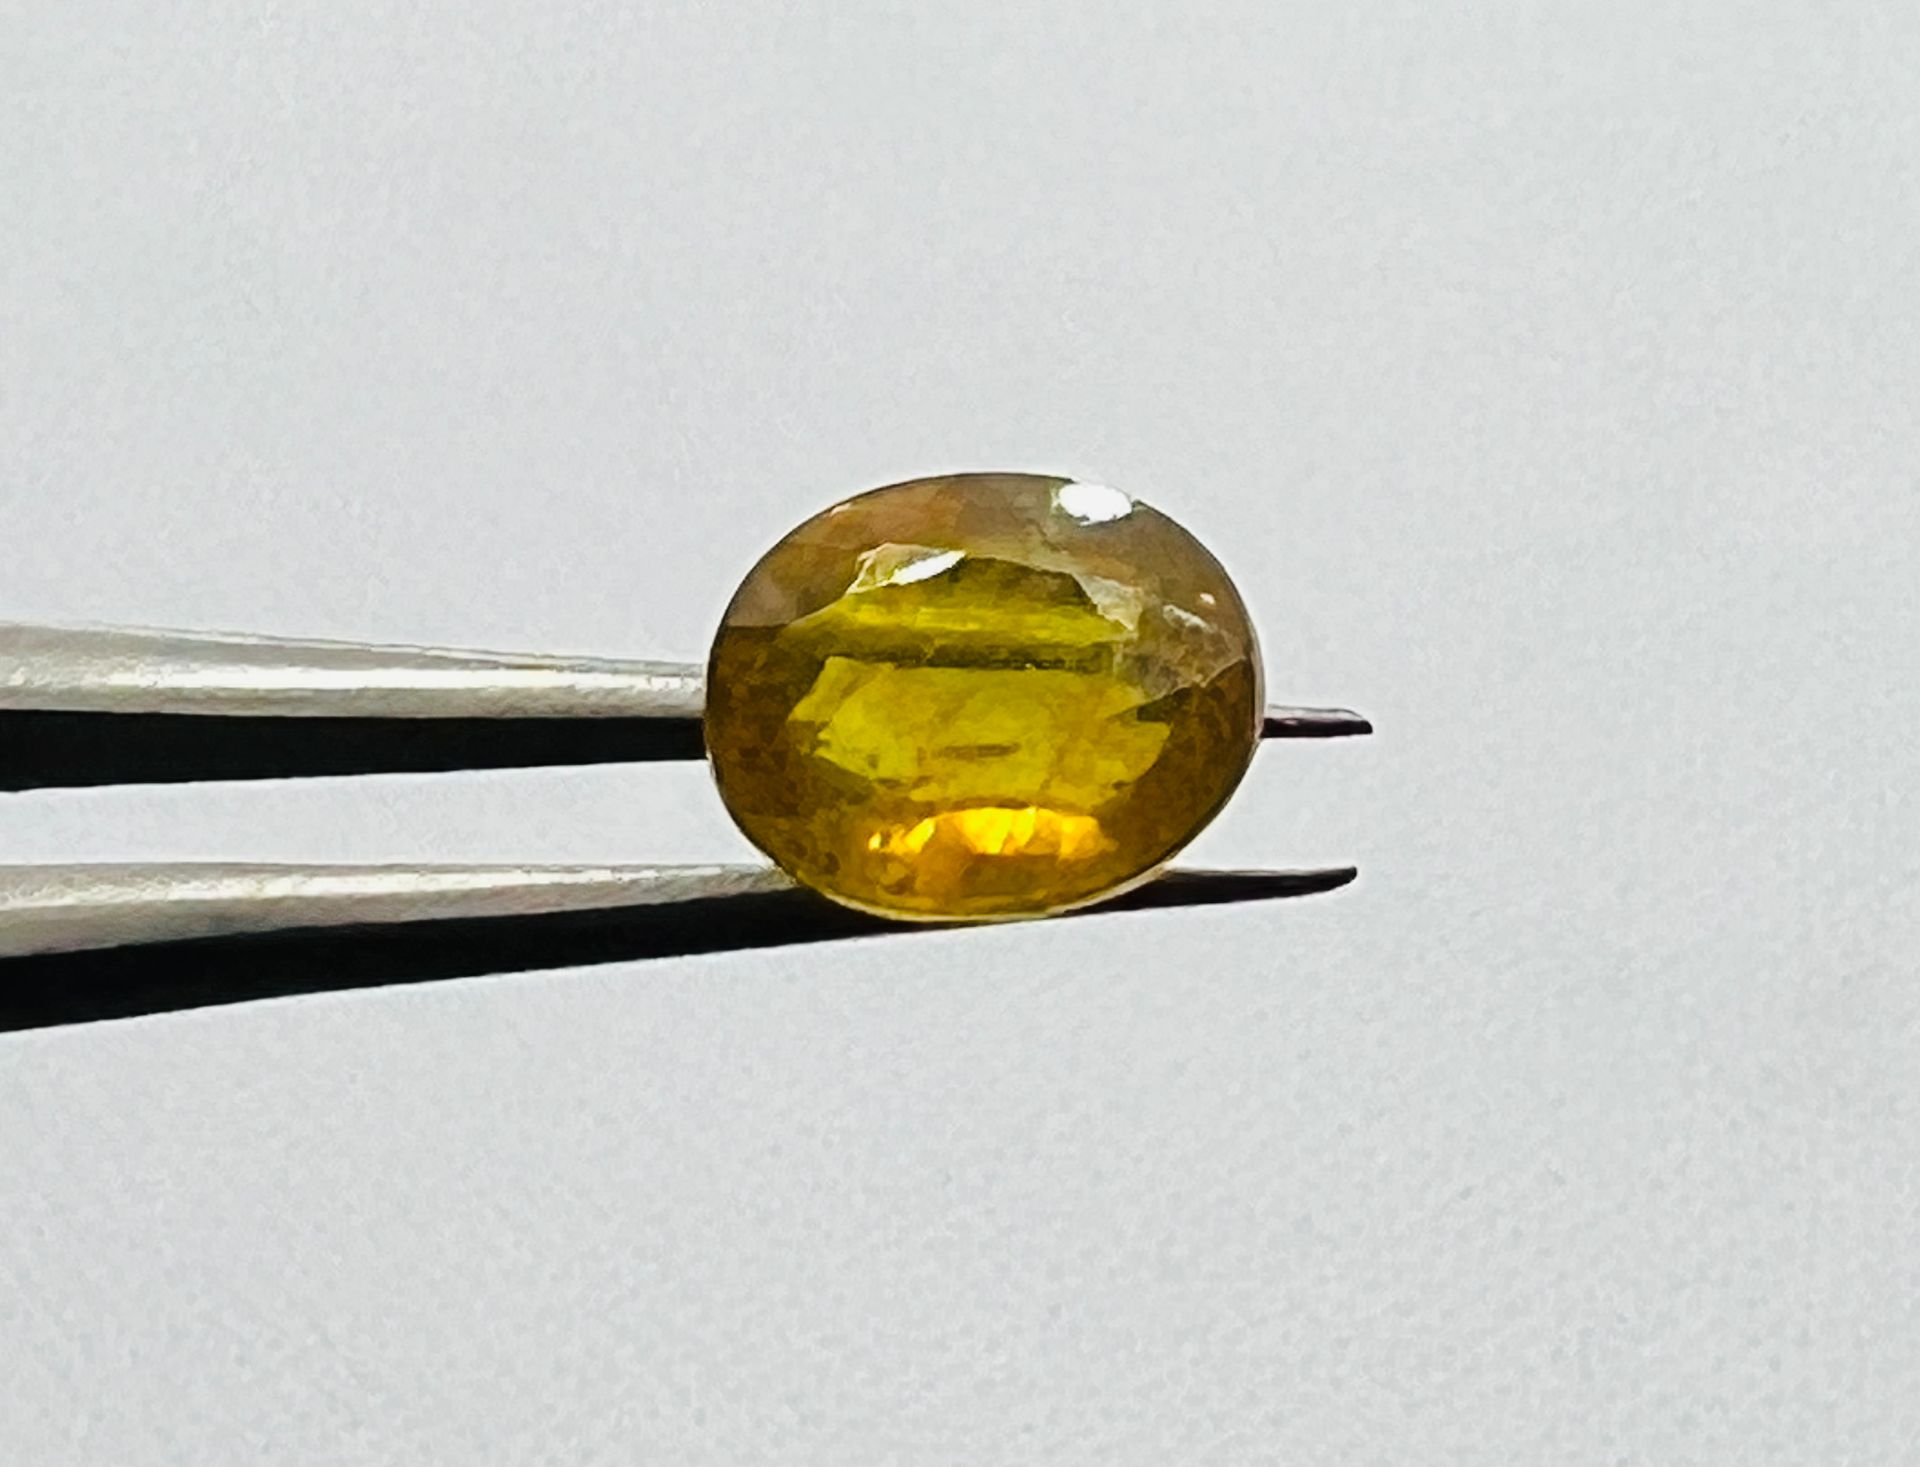 SAPHIRE YELLOW SAPHIRE of 2.38 carats ALGT certificate